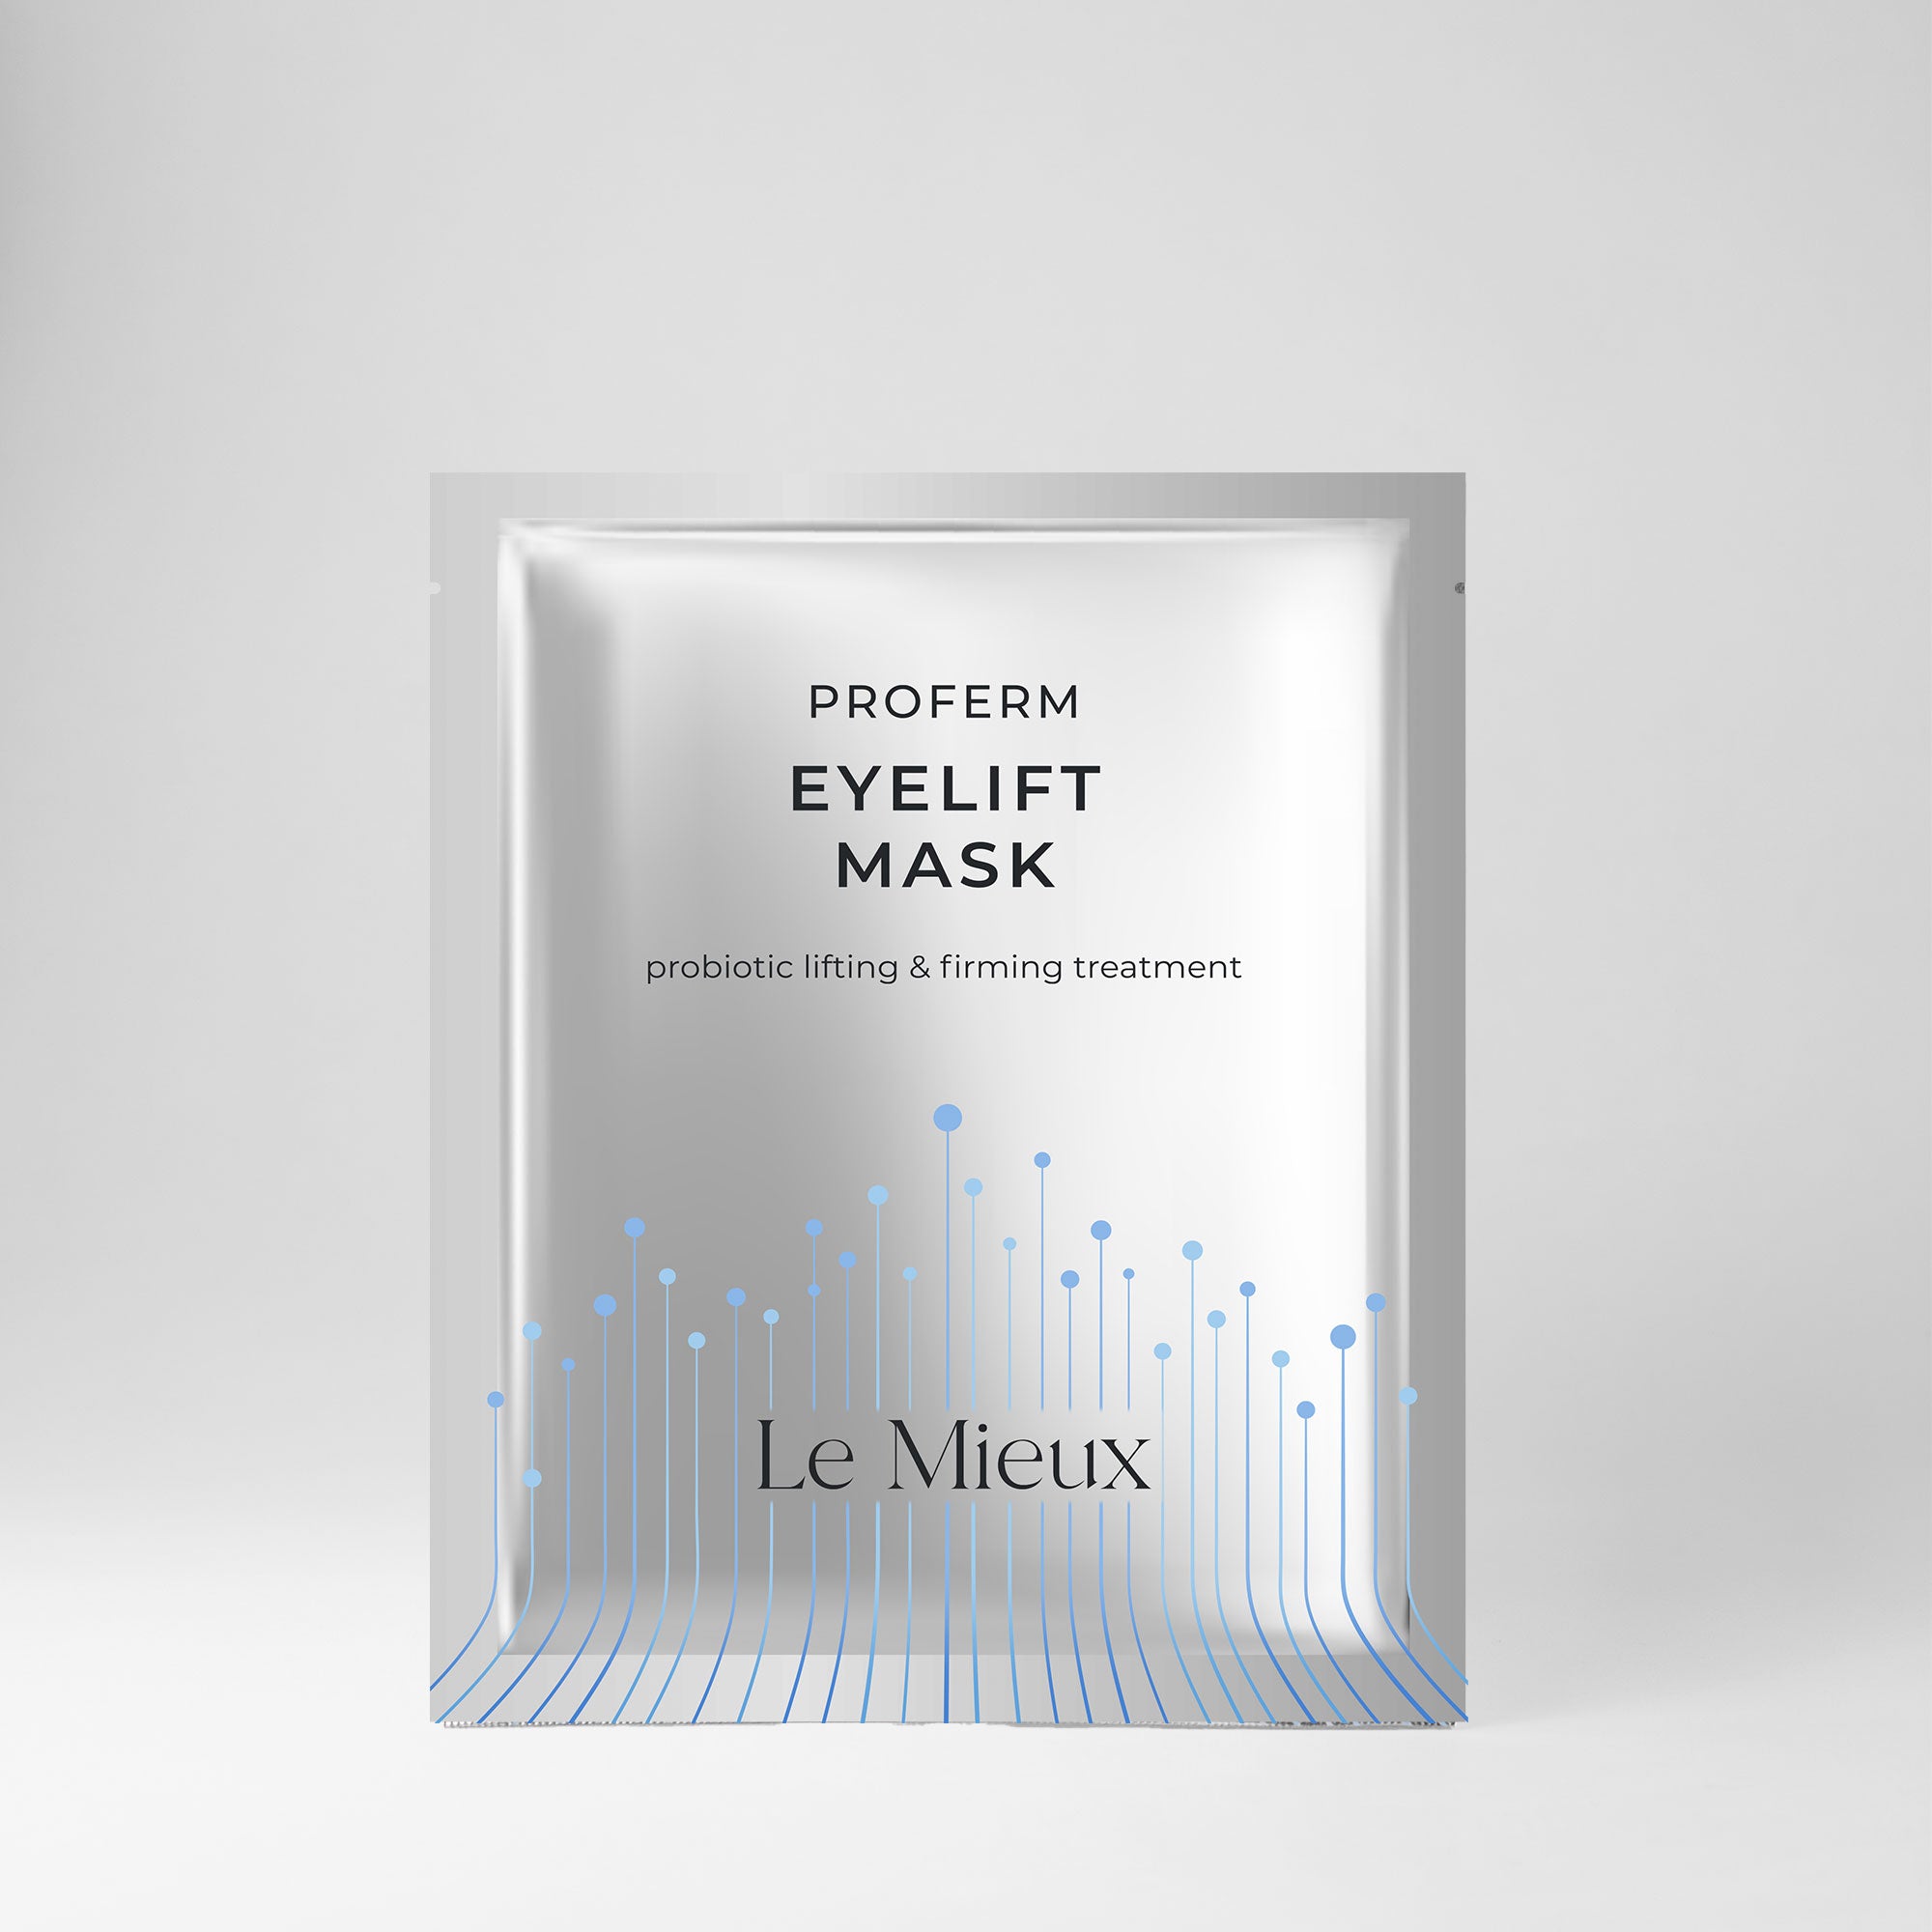  ProFerm Eyelift Mask from Le Mieux Skincare - 1